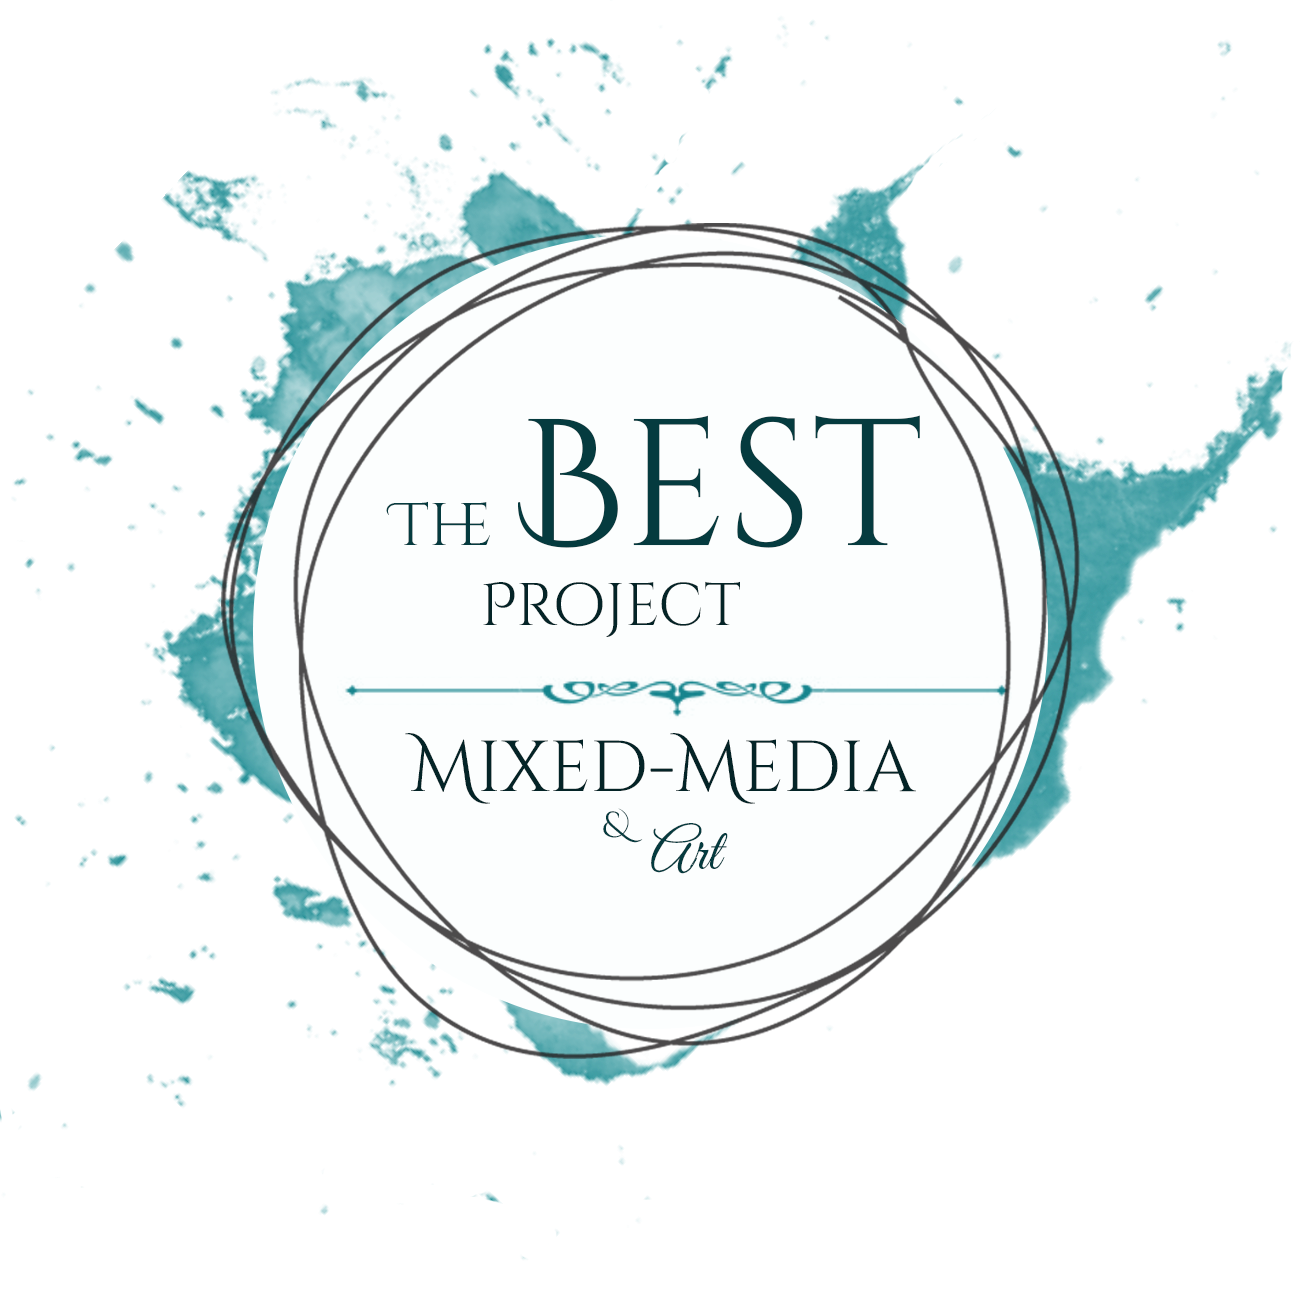 Best project Mixed media & art joint project "Creative art" and October 2017 chall